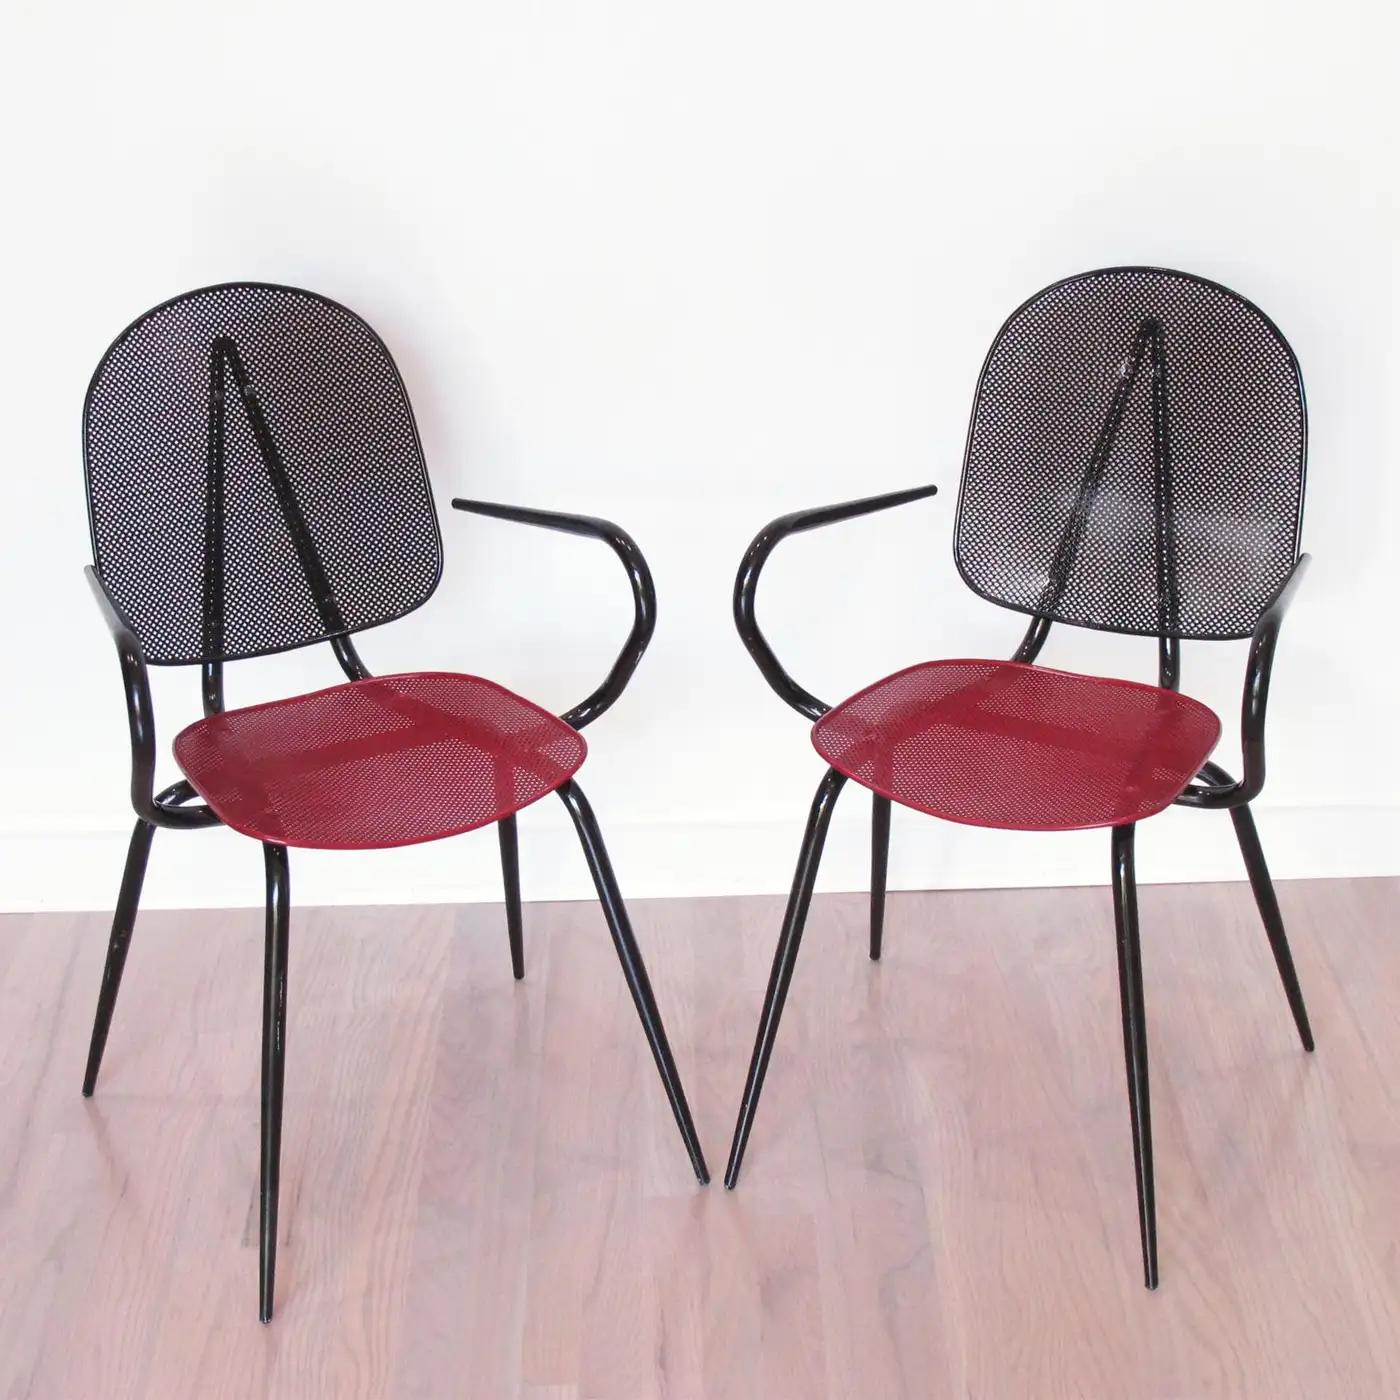 Mathieu Mategot Style Black and Red Metal Chair or Armchair, a pair In Excellent Condition For Sale In Atlanta, GA